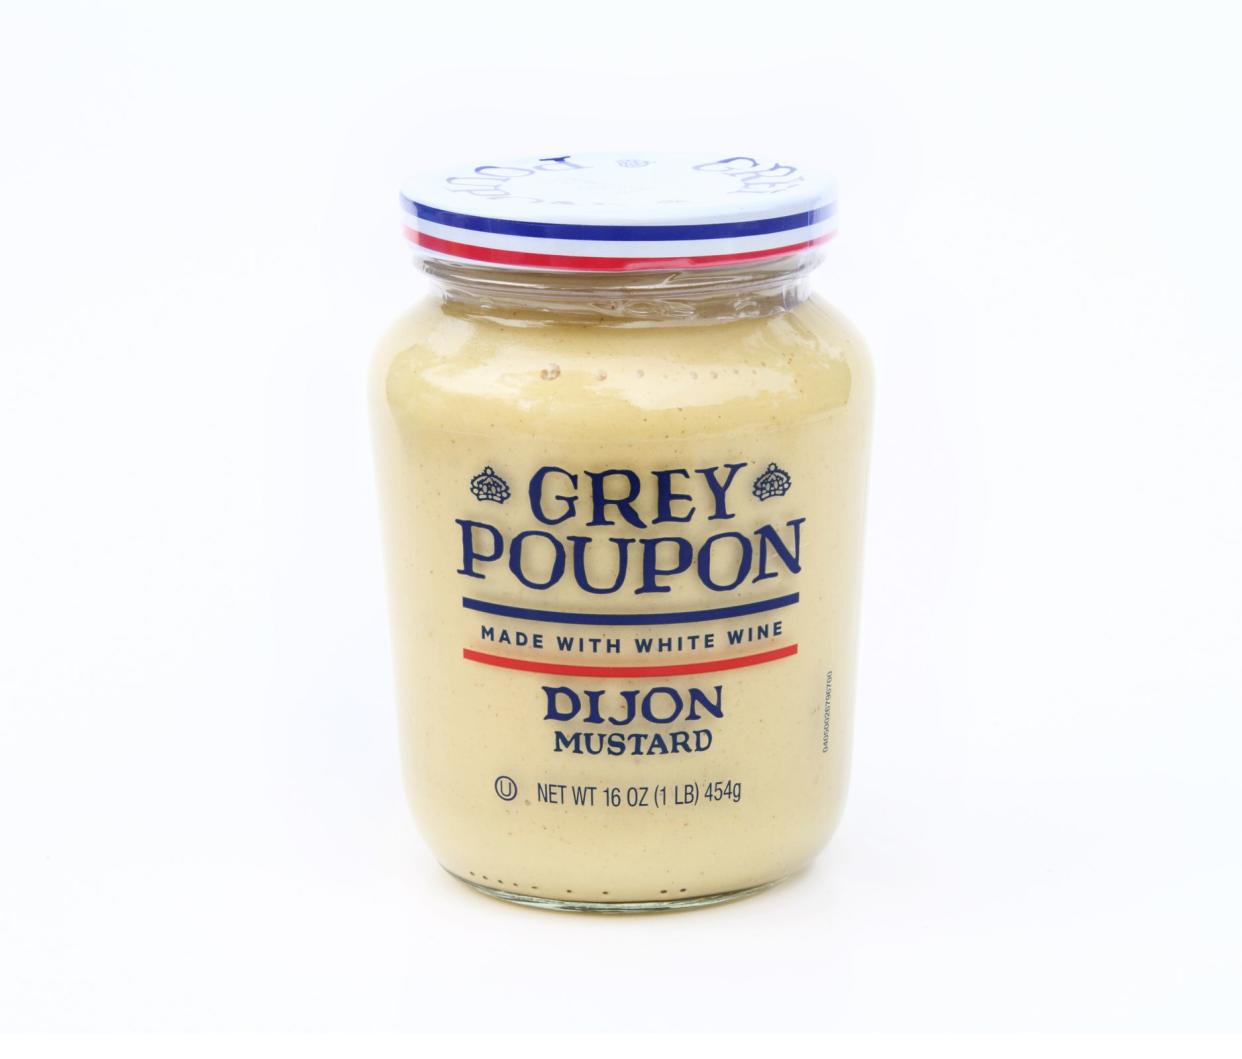 West Palm Beach, USA - December 25, 2014: A jar of Grey Poupon dijon mustard made with white wine. Grey Poupon is a product of Kraft Foods.